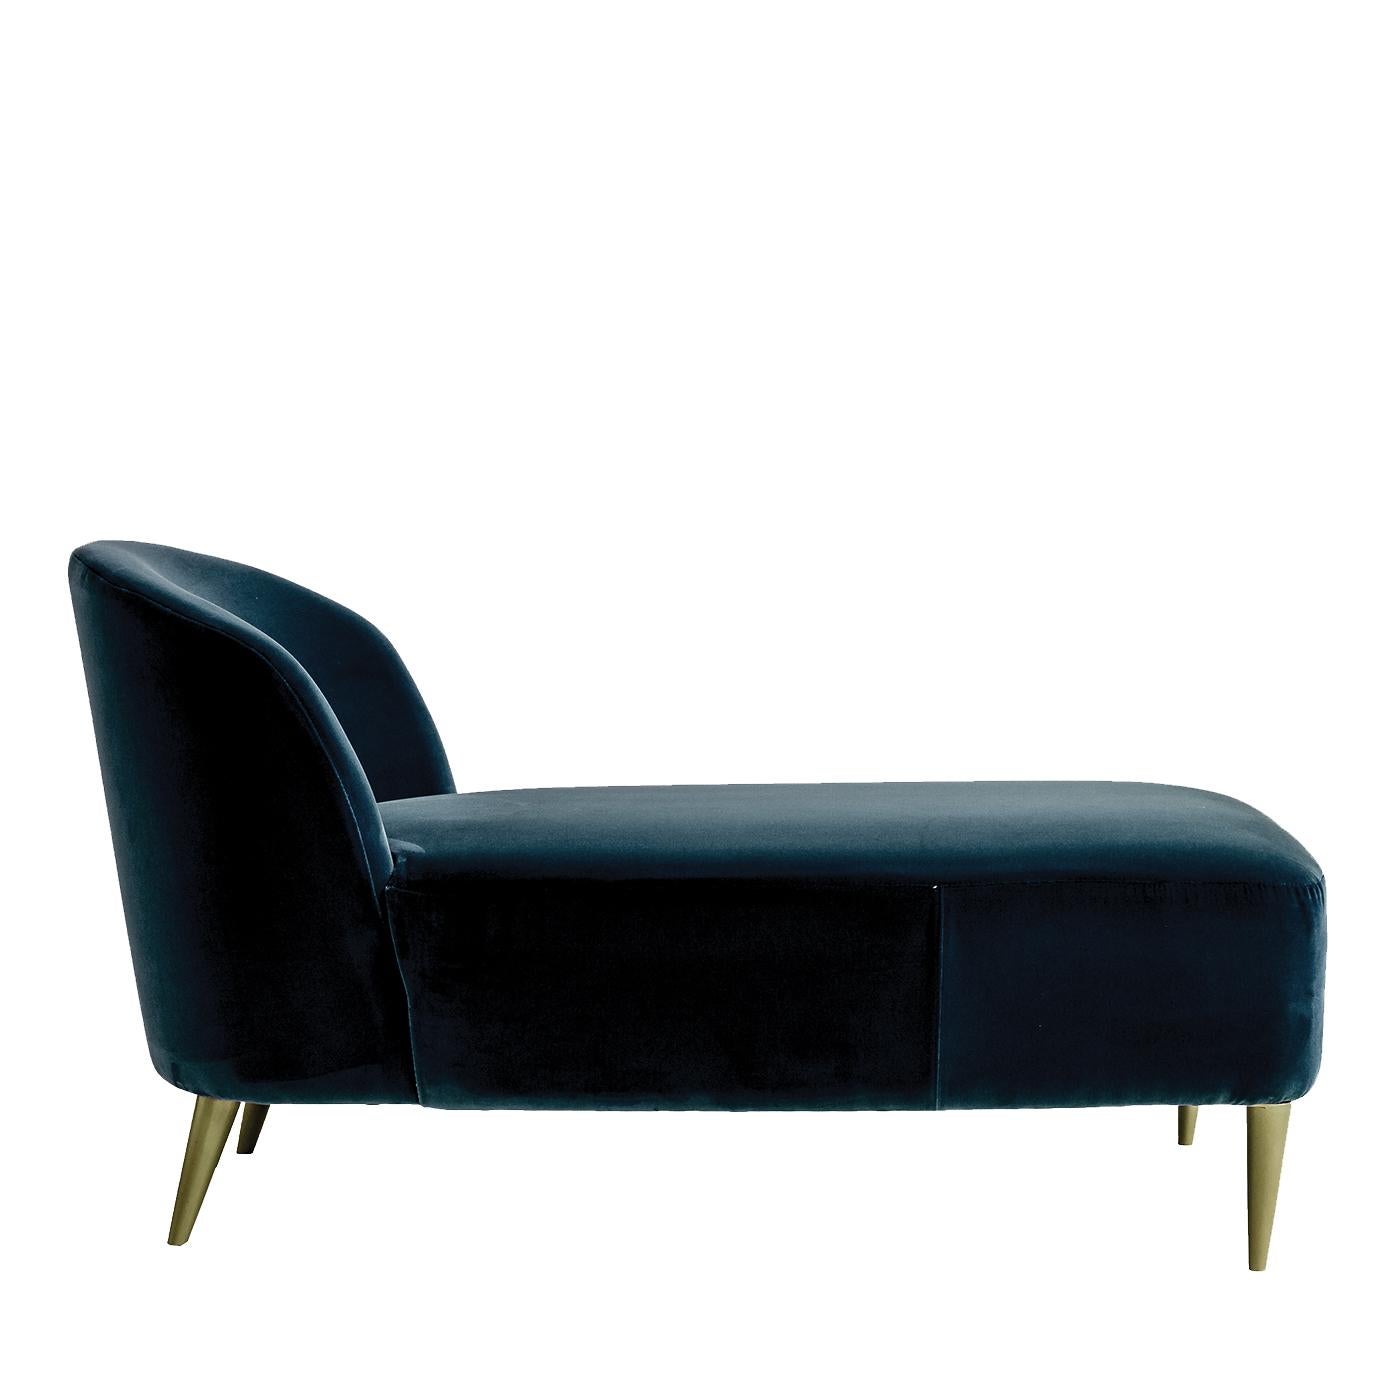 Classic yet versatile, this sophisticated chaise longue elevates any room to a relaxing and comfortable space. The tall, enveloping backrest is defined by soft curves and gently sloped arms, while the long seat has a tall cushion made of